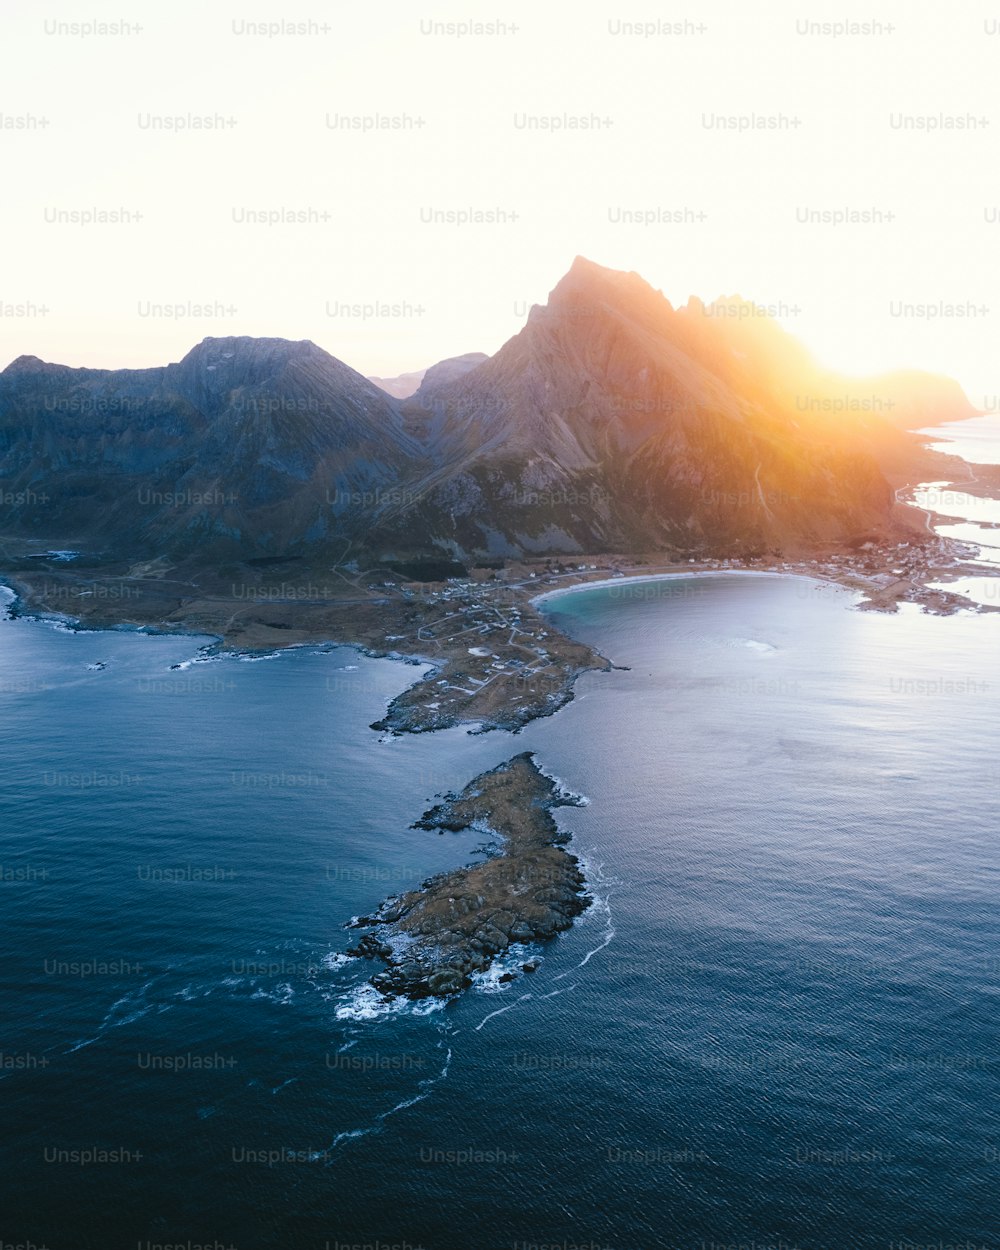 a body of water with islands and mountains in the background